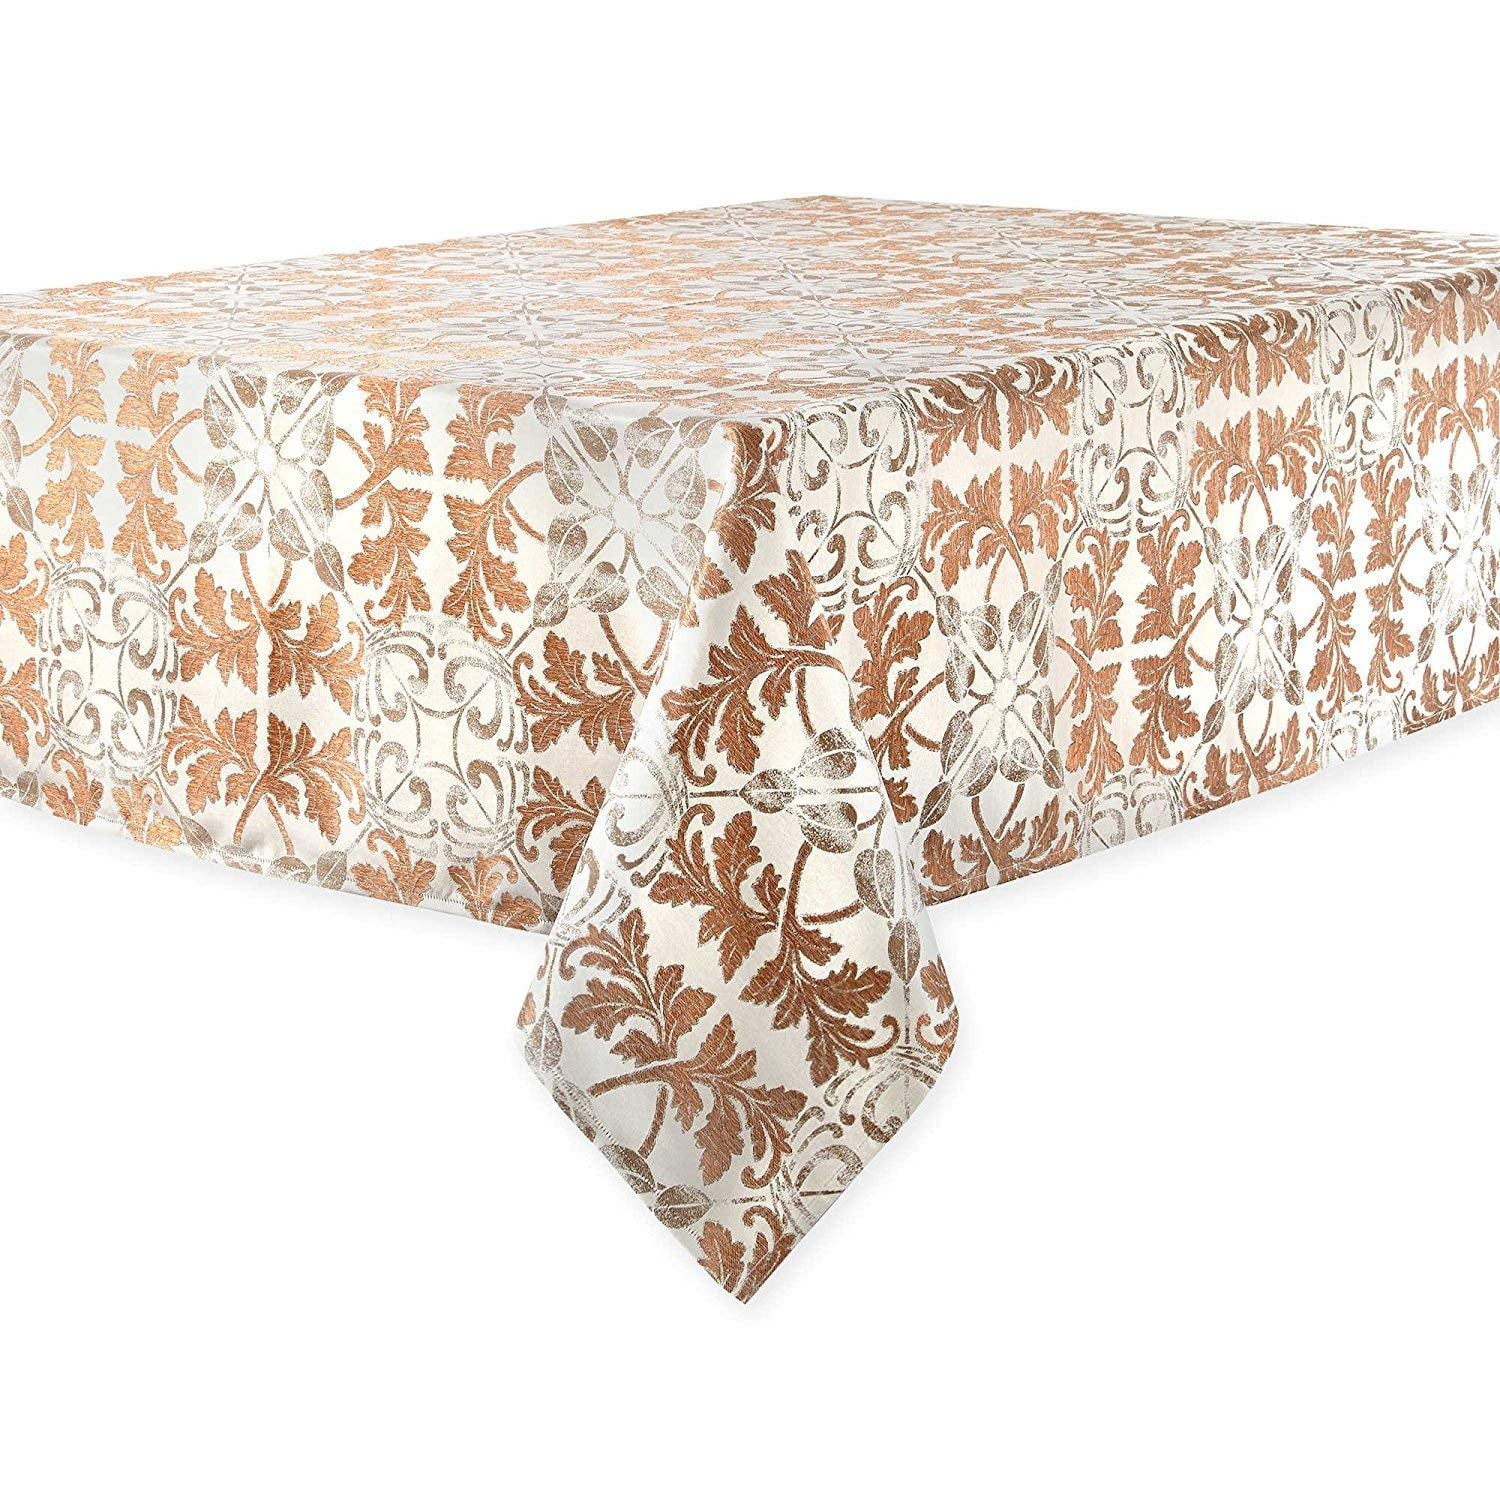 Details about   Bronze Autumn Vine Rectangle Tablecloth Damask 60 x 144 Thanksgiving Fall 